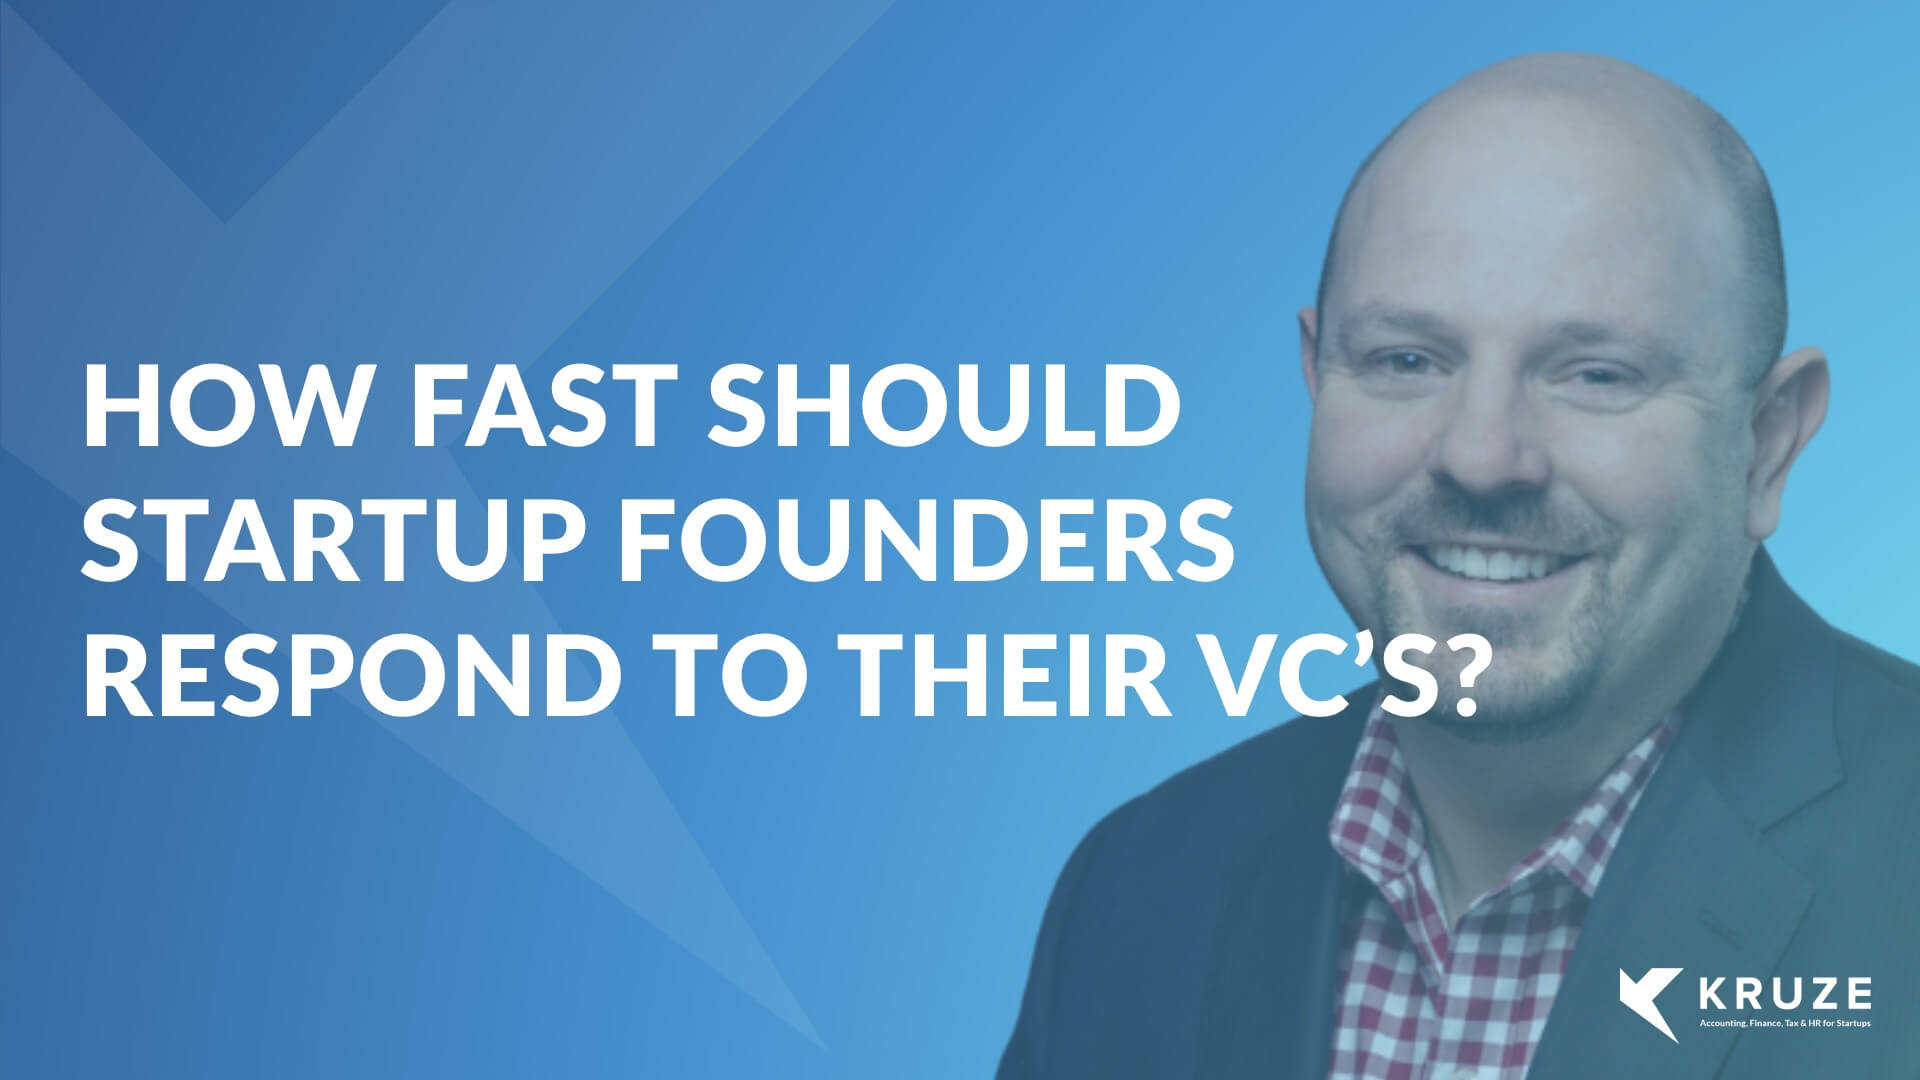 How Quickly Should Founders Respond to VCs?